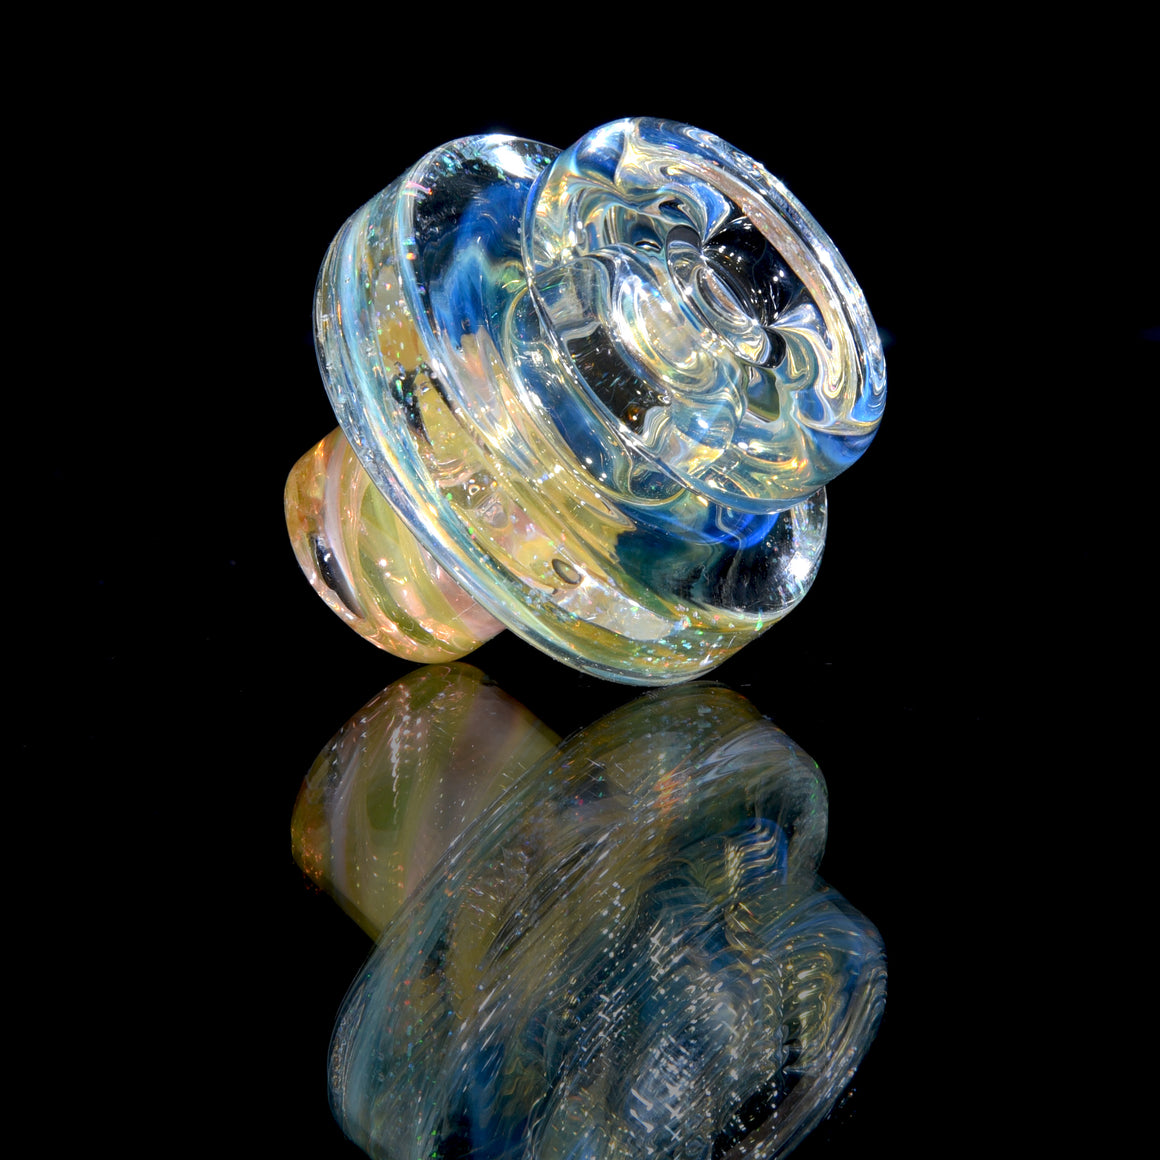 Gold & Silver-fumed Dual-hole Spinner Cap w/ Crushed Opal Accent